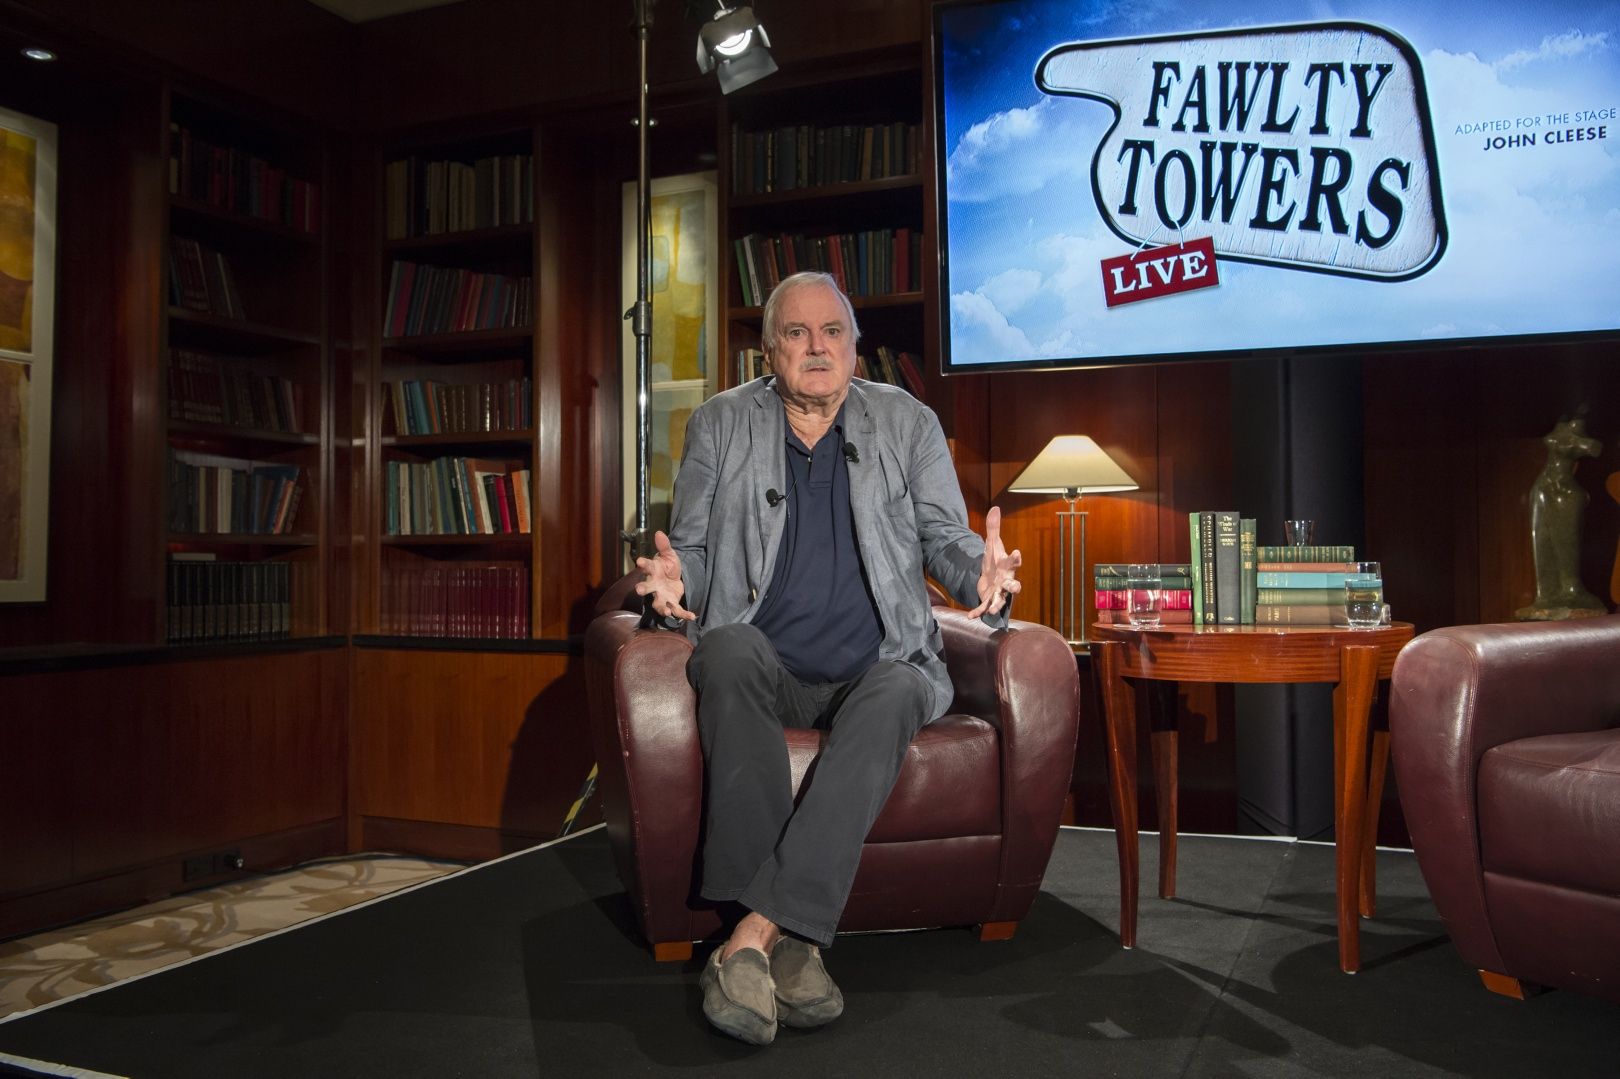 John Cleese launches Fawlty Towers Live